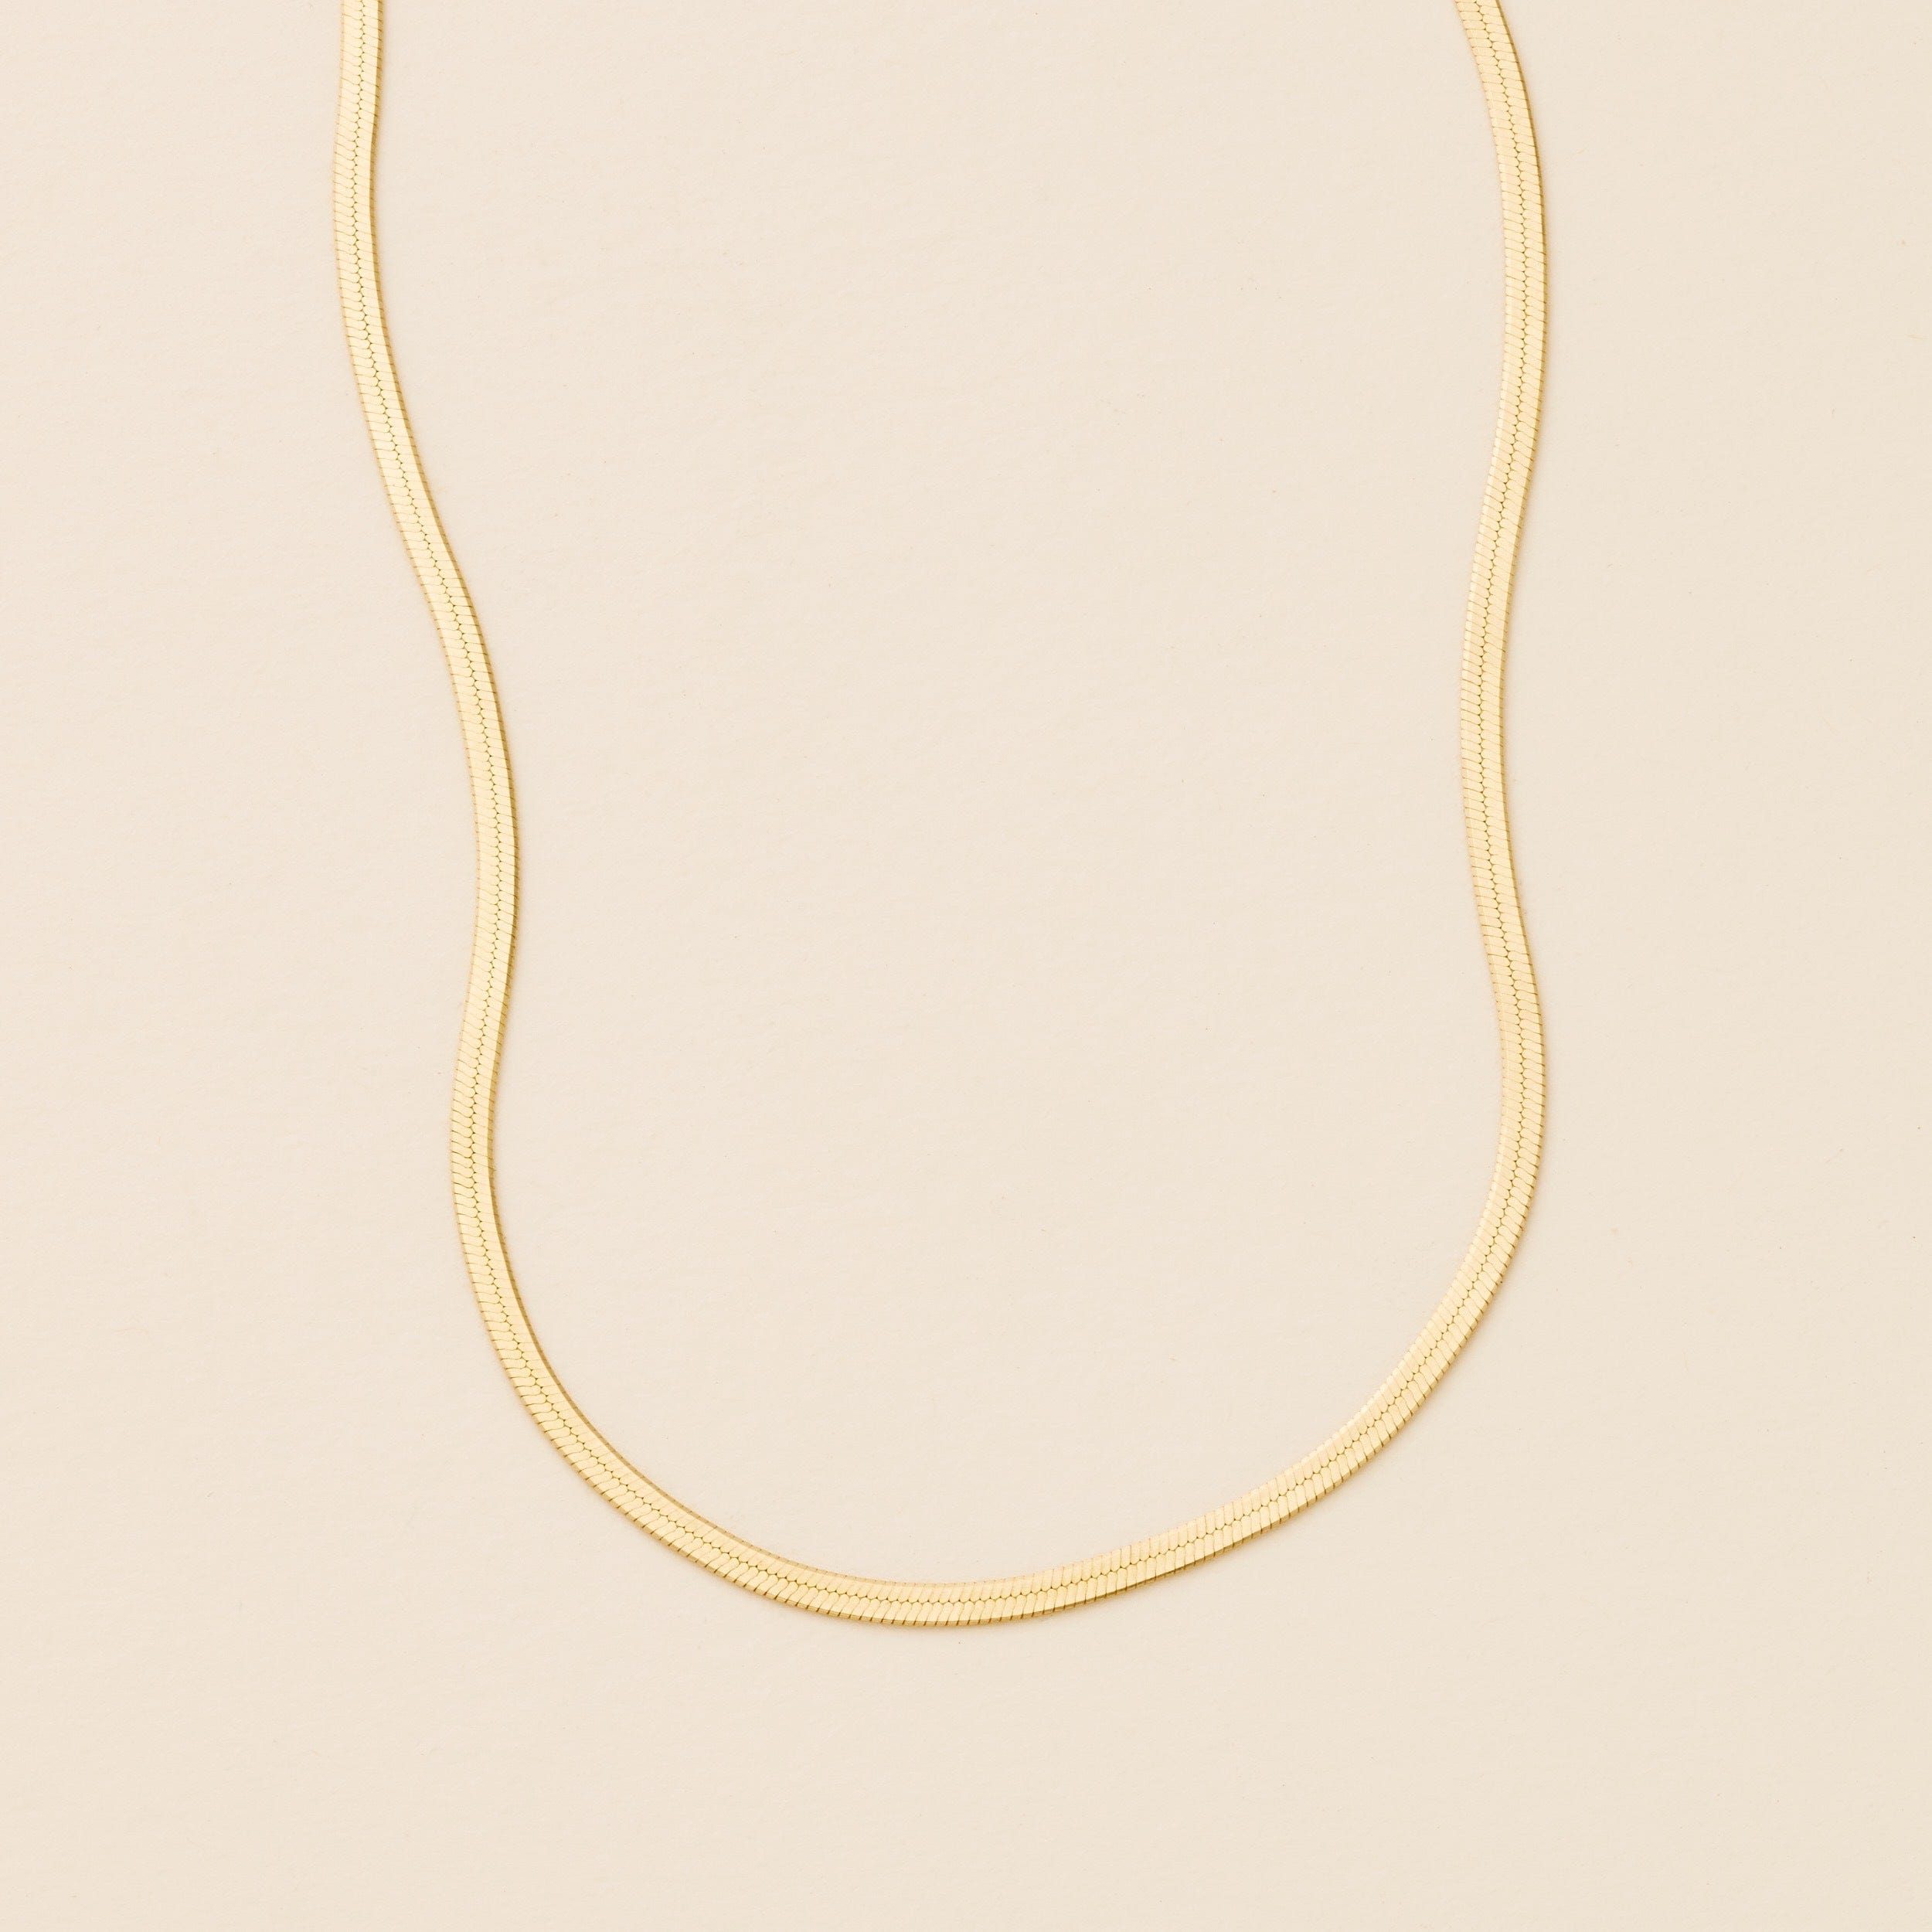 Hera Chain Necklace - 1.9mm & 3mm Gold Plated / 1.9MM Necklace